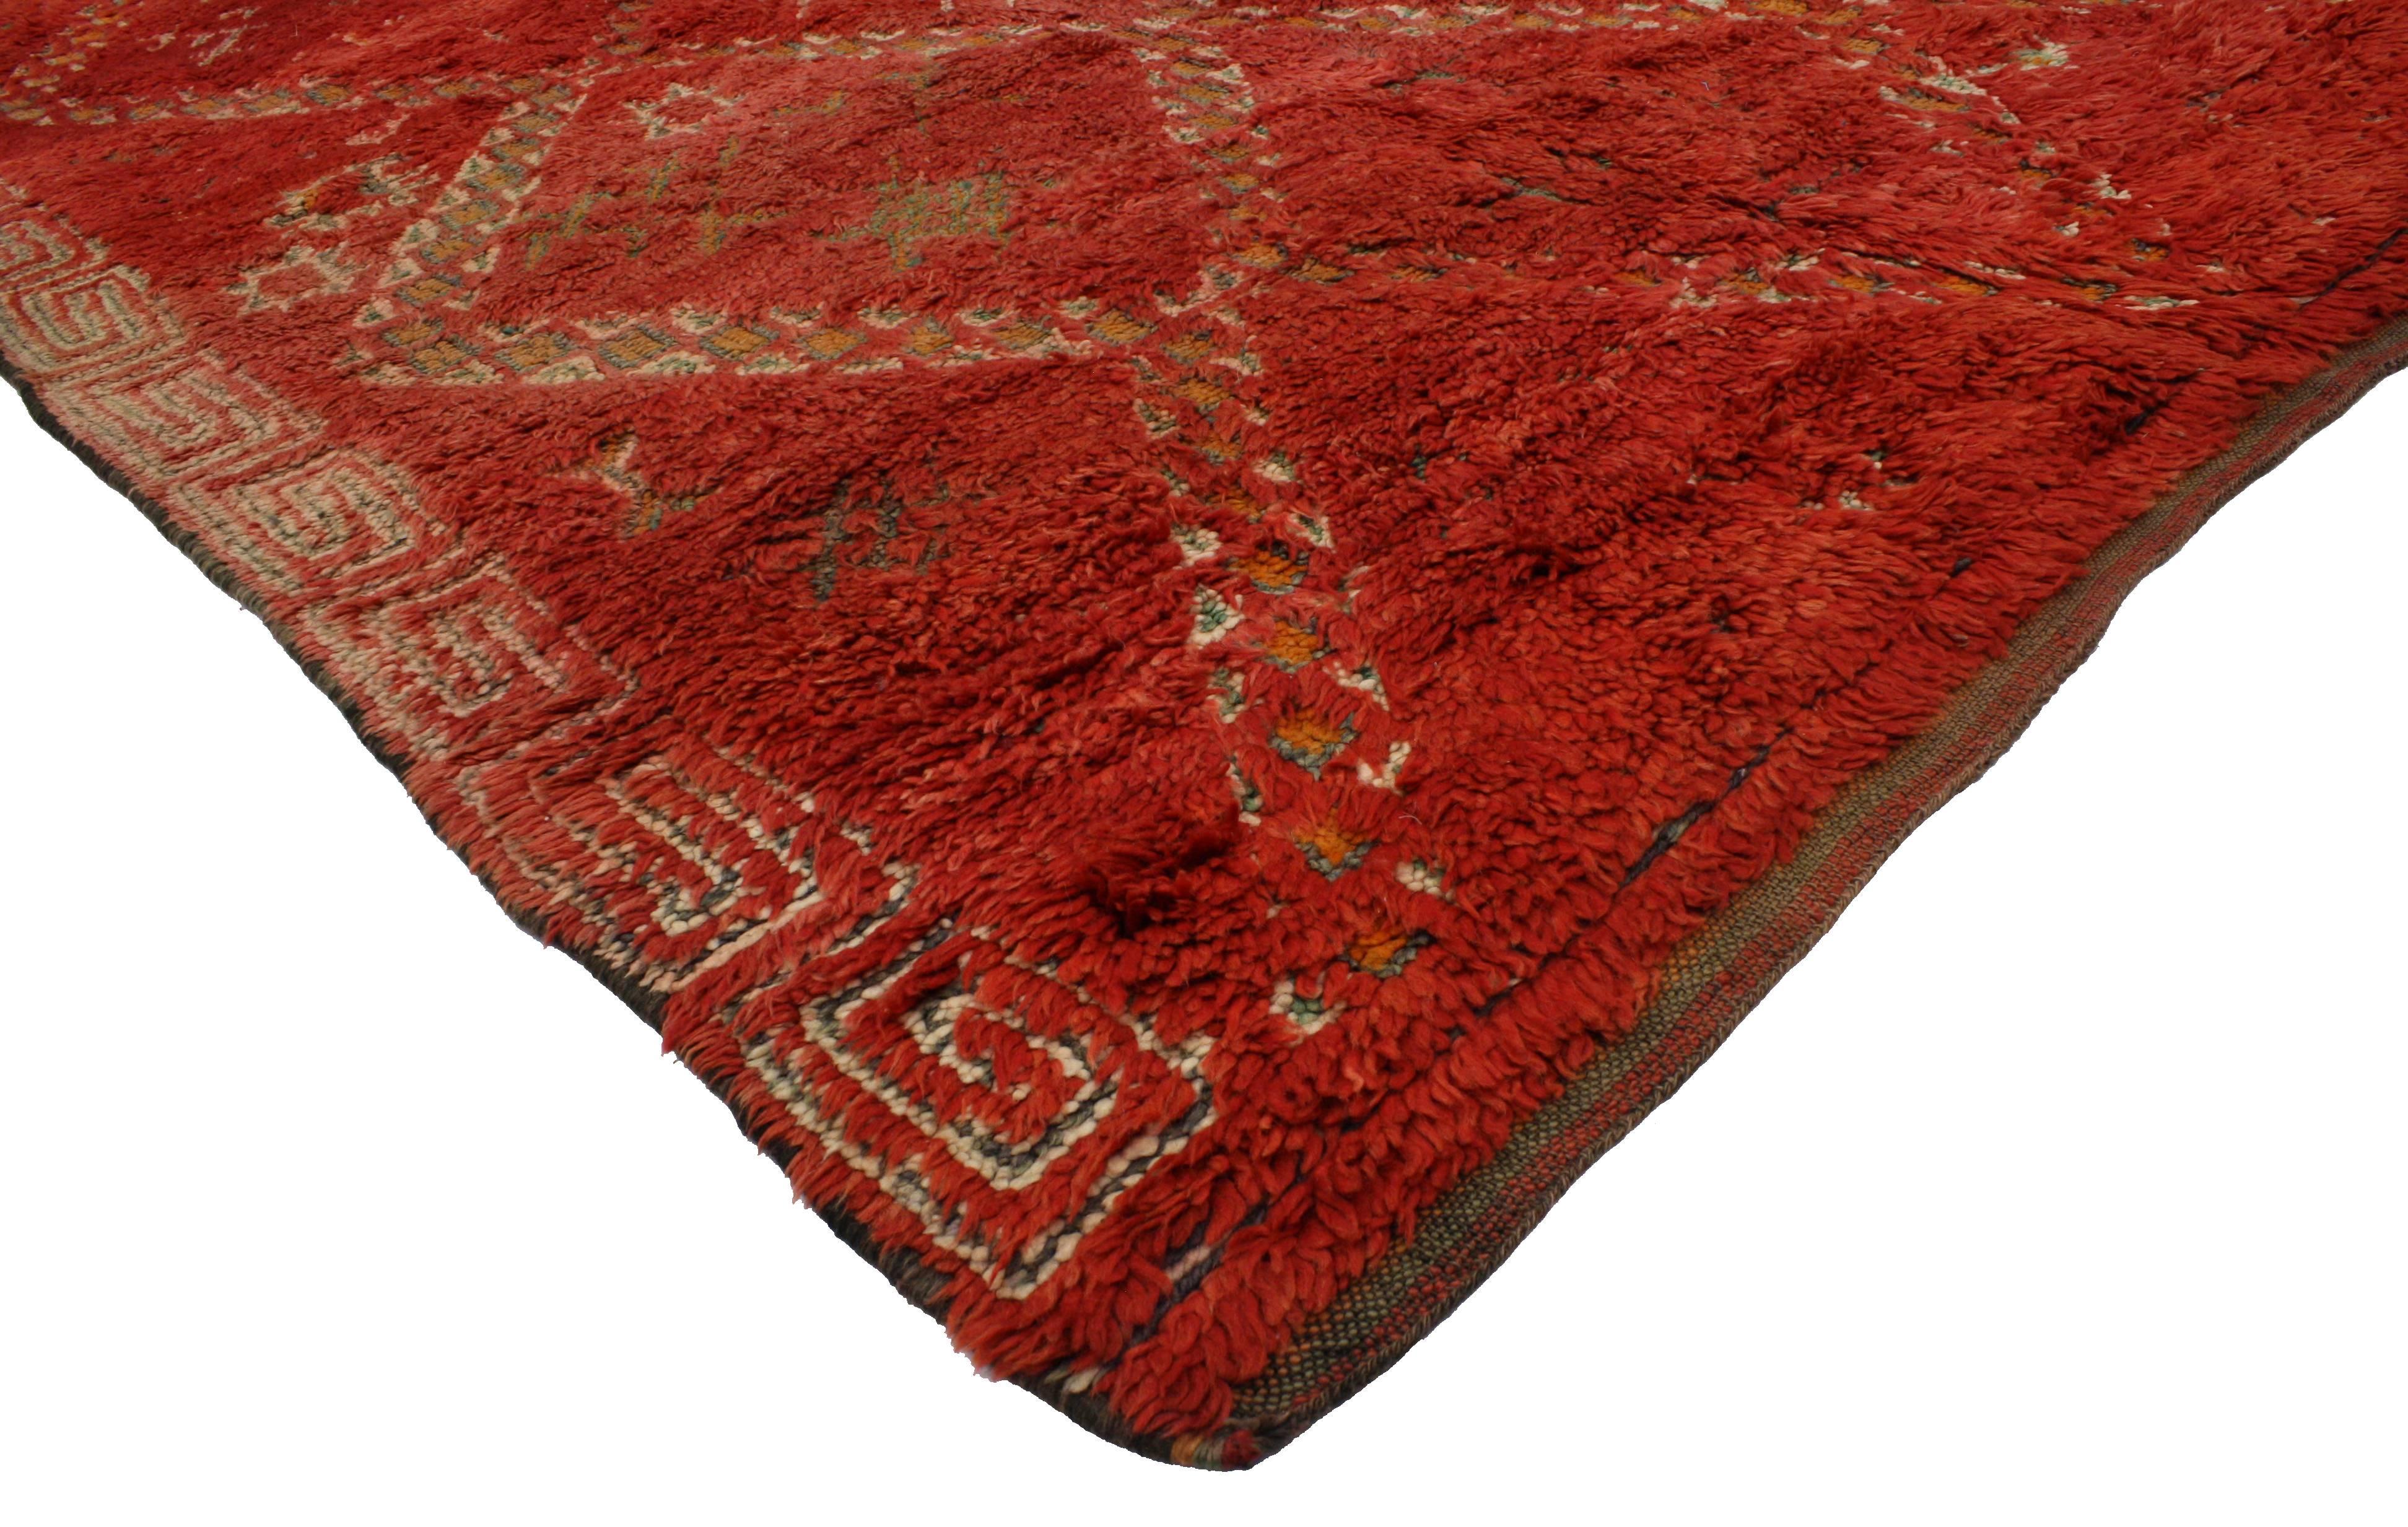 20153 Vintage Red Moroccan Zayane Rug, Berber Moroccan Beni M'Guild Carpet. With its bold red color and tribal style, this hand-knotted wool vintage Moroccan Zayane Beni M'Guild rug is heavily ornamented by diamonds, which symbolize the power of